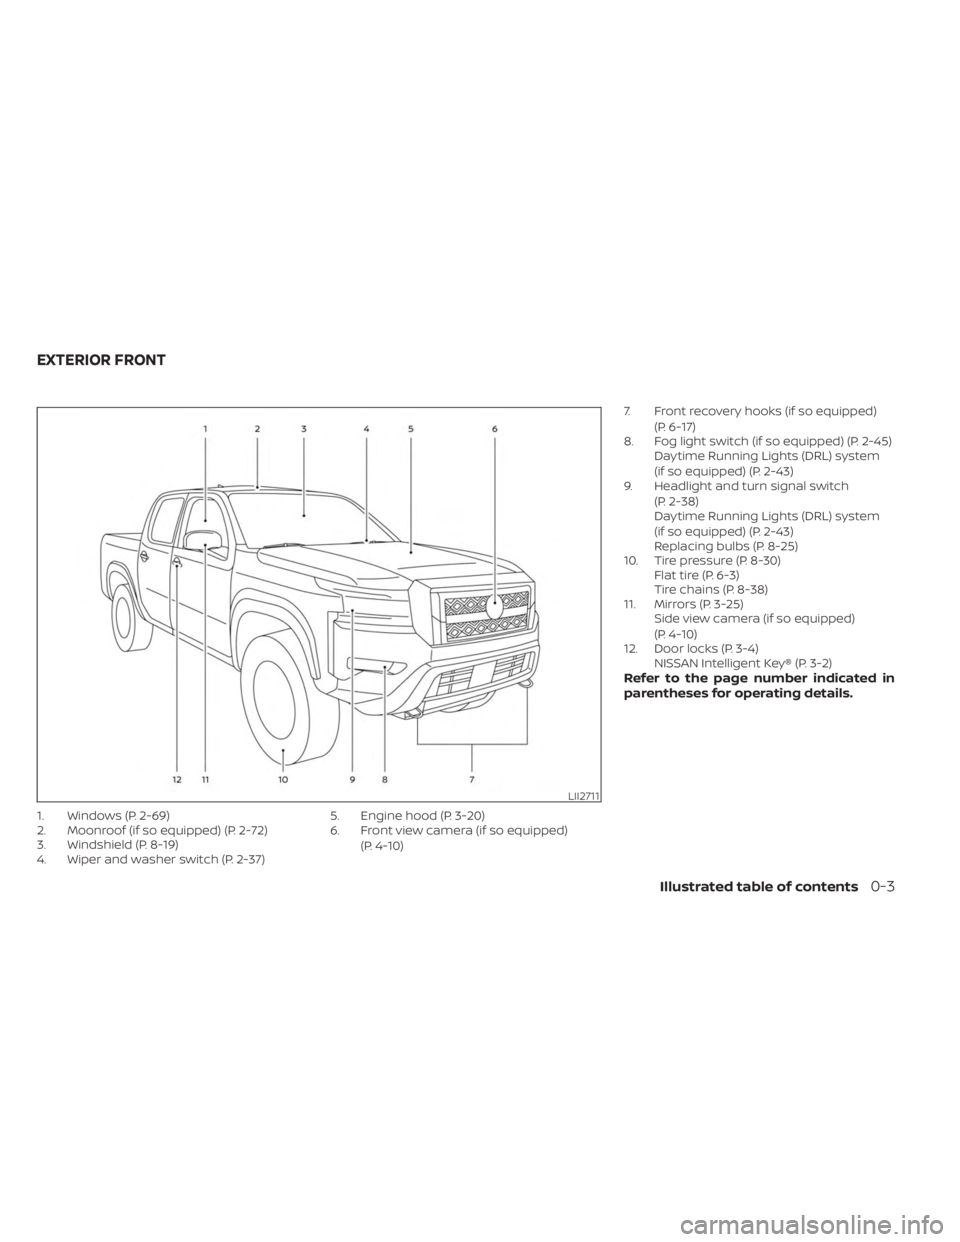 NISSAN FRONTIER 2022  Owner´s Manual 1. Windows (P. 2-69)
2. Moonroof (if so equipped) (P. 2-72)
3. Windshield (P. 8-19)
4. Wiper and washer switch (P. 2-37)5. Engine hood (P. 3-20)
6. Front view camera (if so equipped)
(P. 4-10) 7. Fron